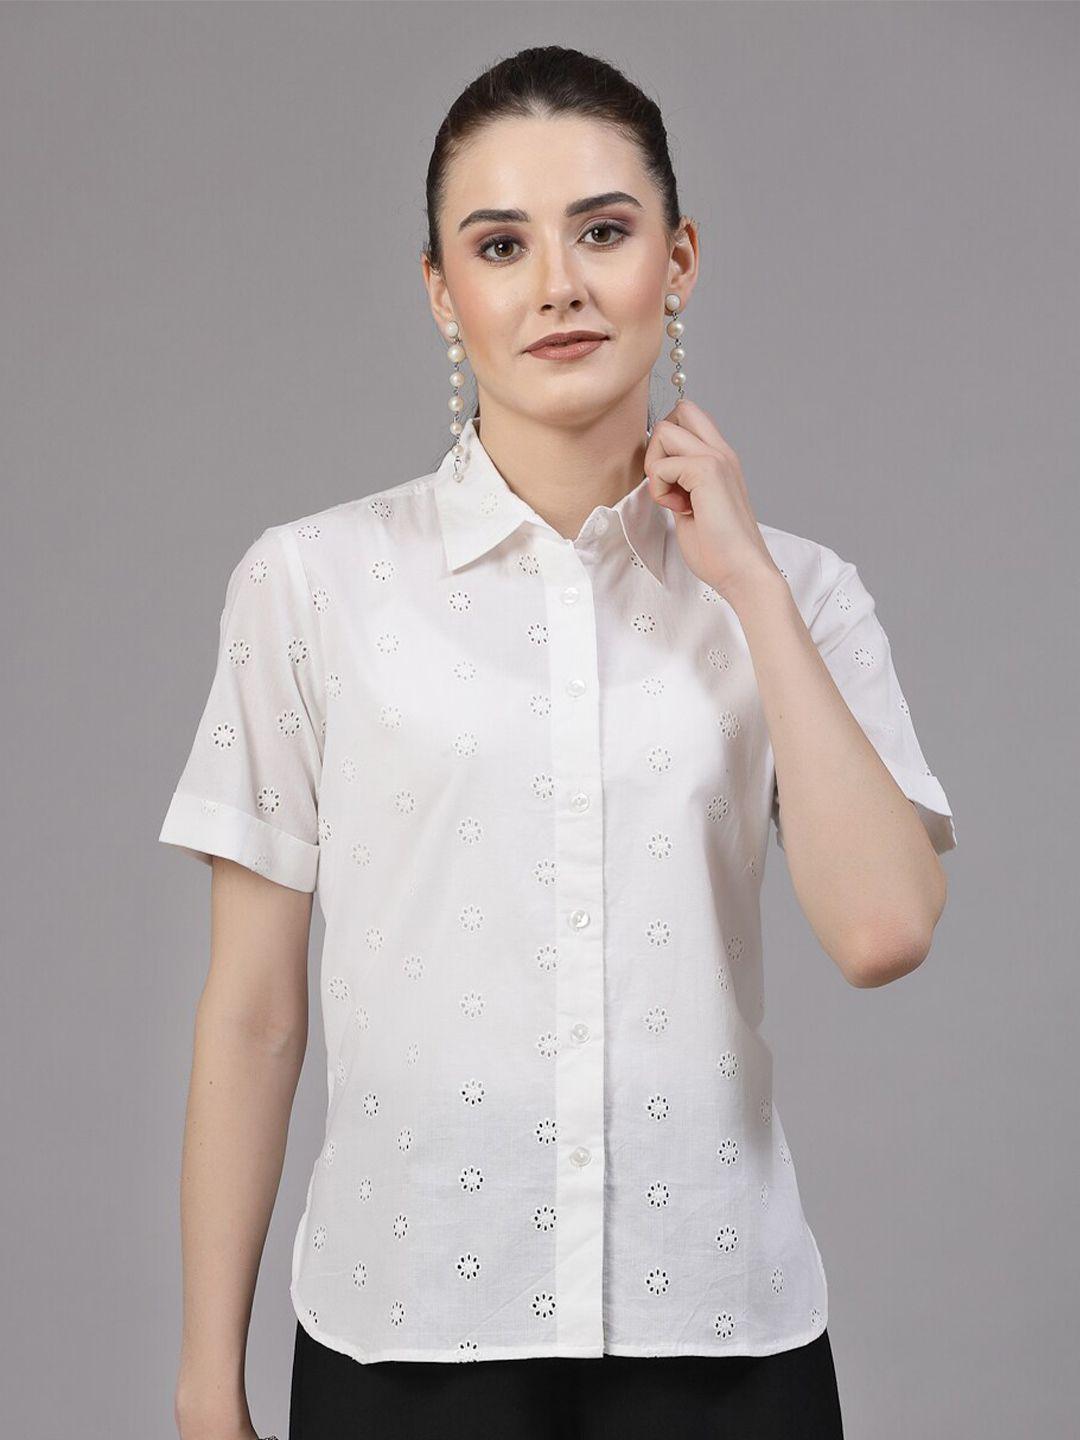 style quotient women white relaxed semi sheer printed casual shirt